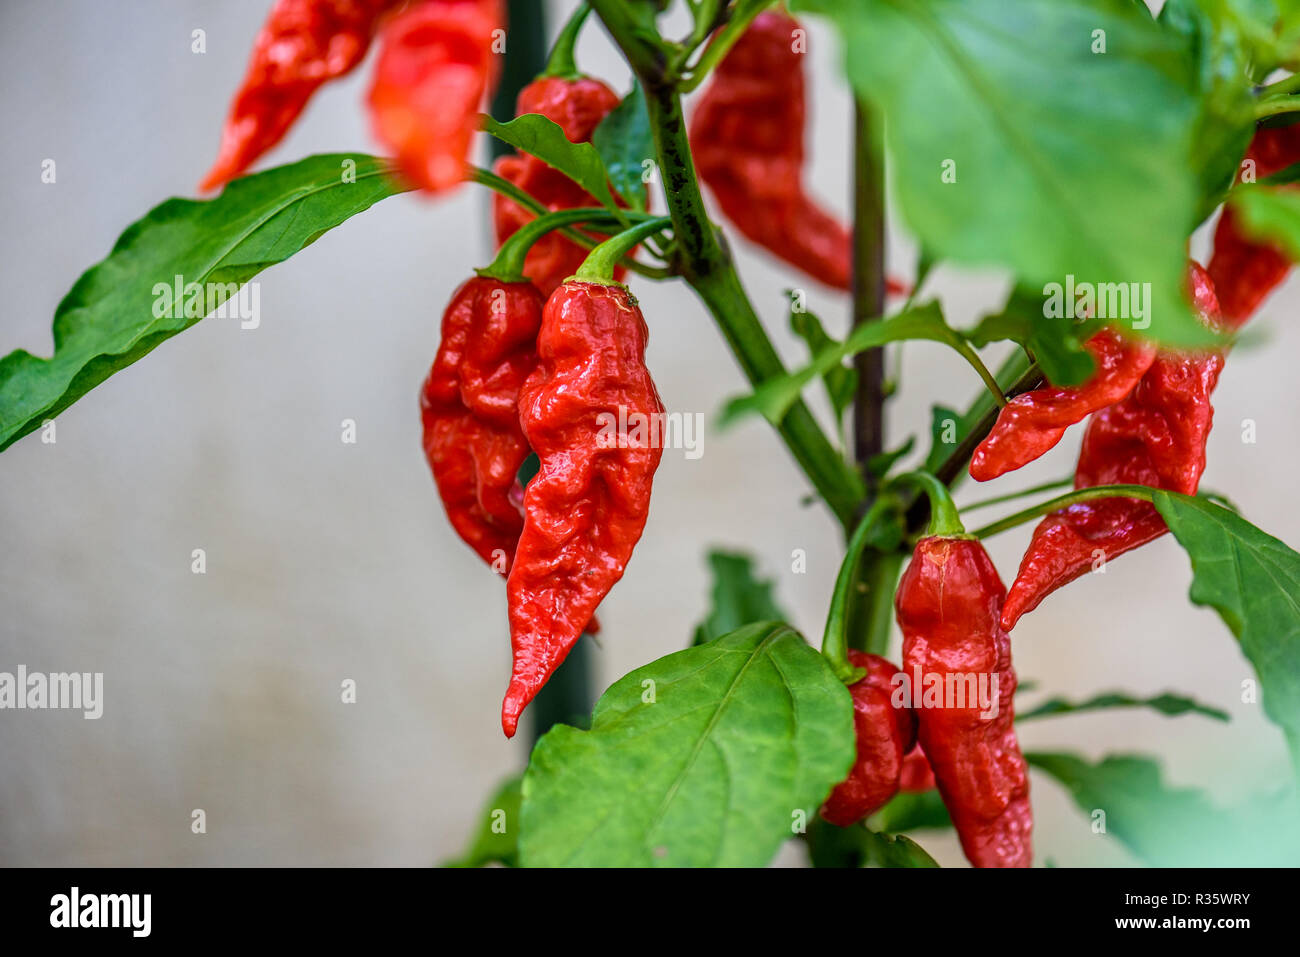 Red hot chilli ghost pepper Bhut Jolokia on a plant. Capsicum chinense peppers on a green plant with leaves in home garden or a farm. Stock Photo